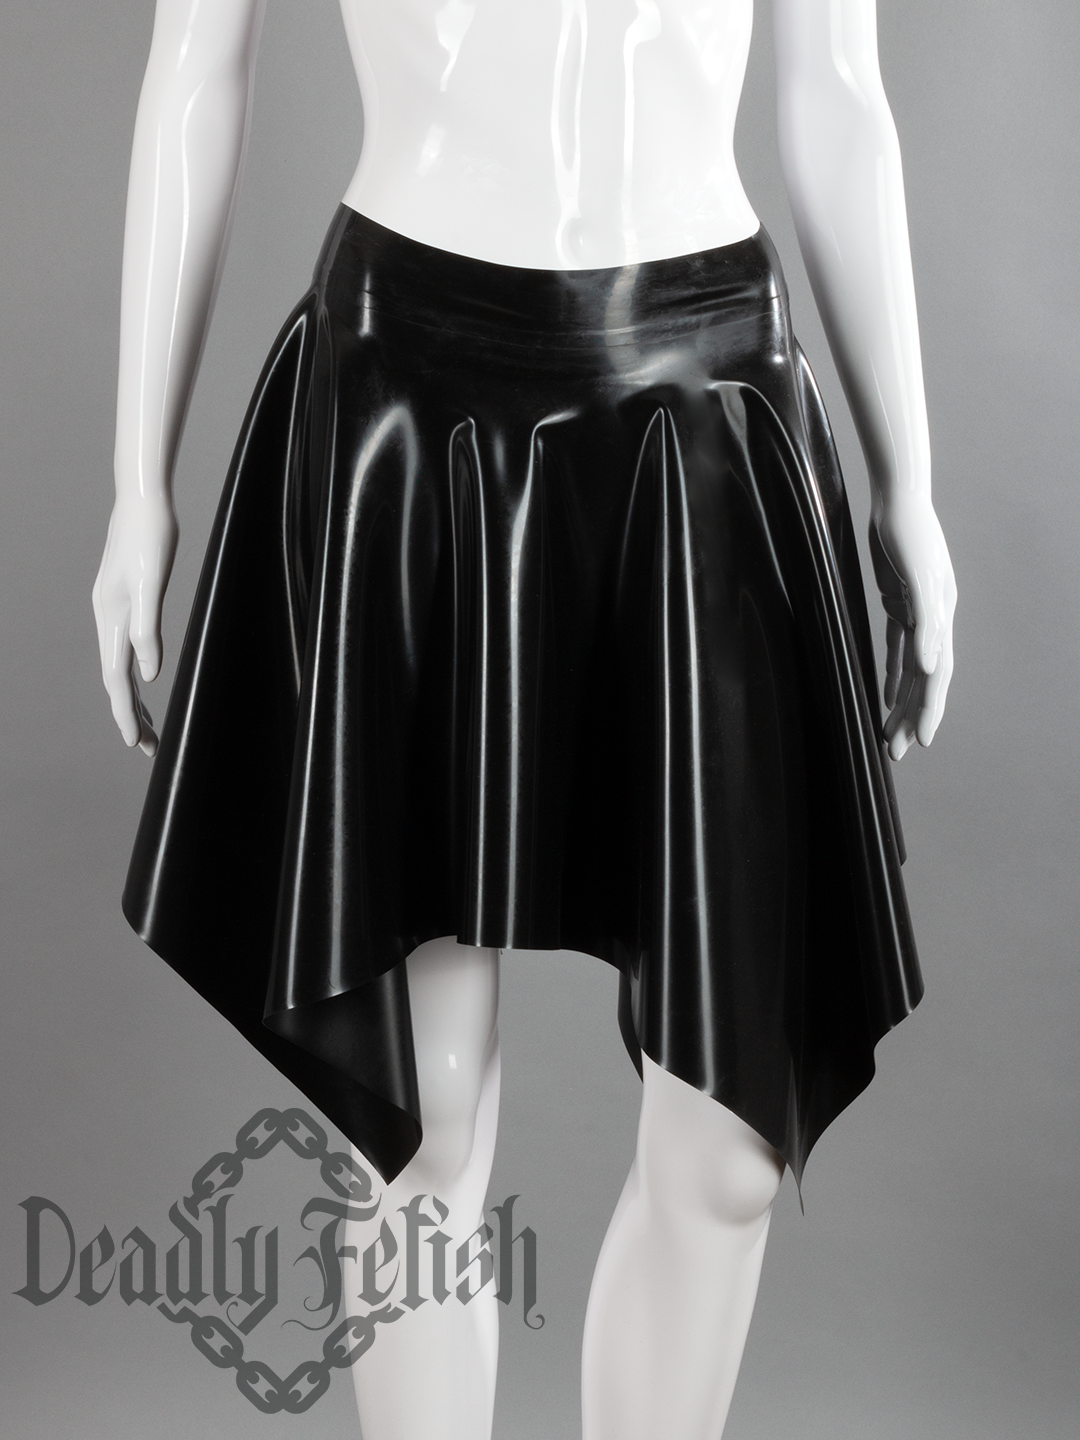 Deadly Fetish Made-To-Order Latex: Skirt #09